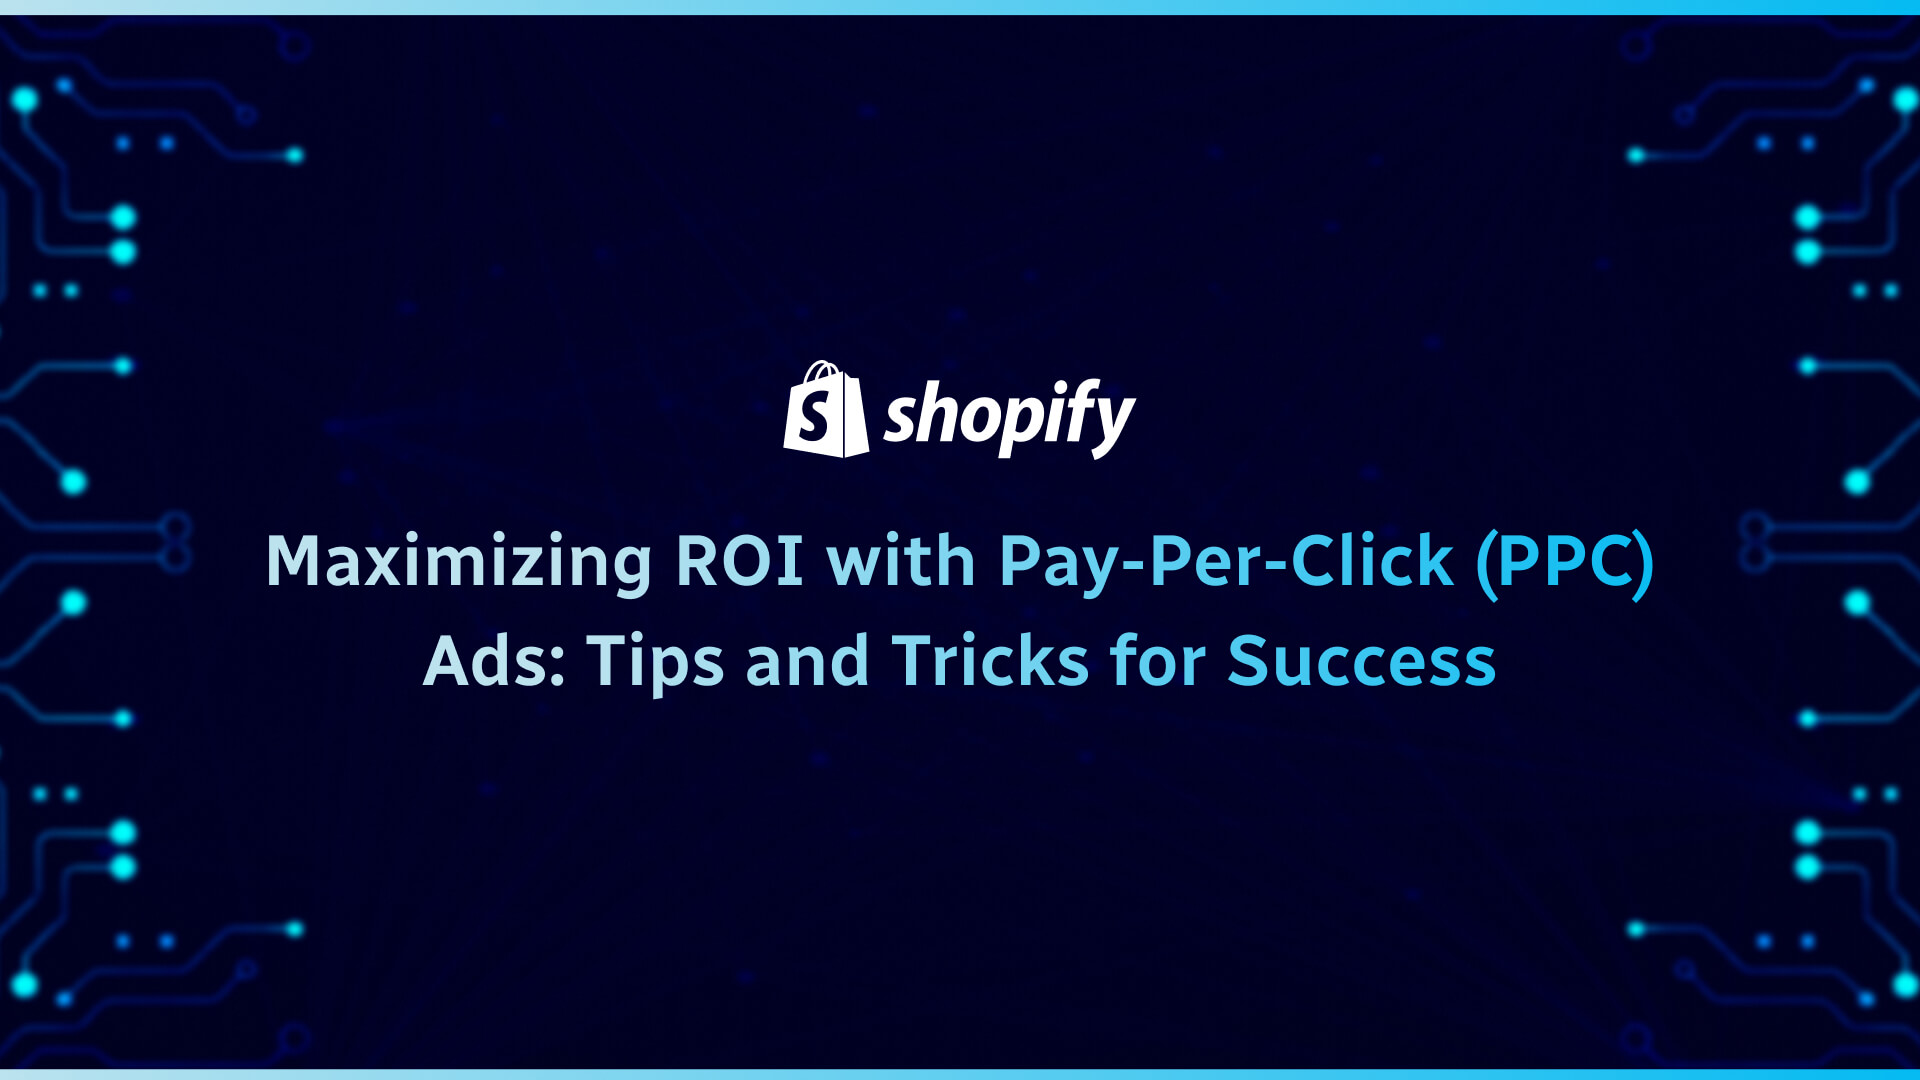 Maximizing ROI with Pay-Per-Click (PPC) Ads_ Tips and Tricks for Success